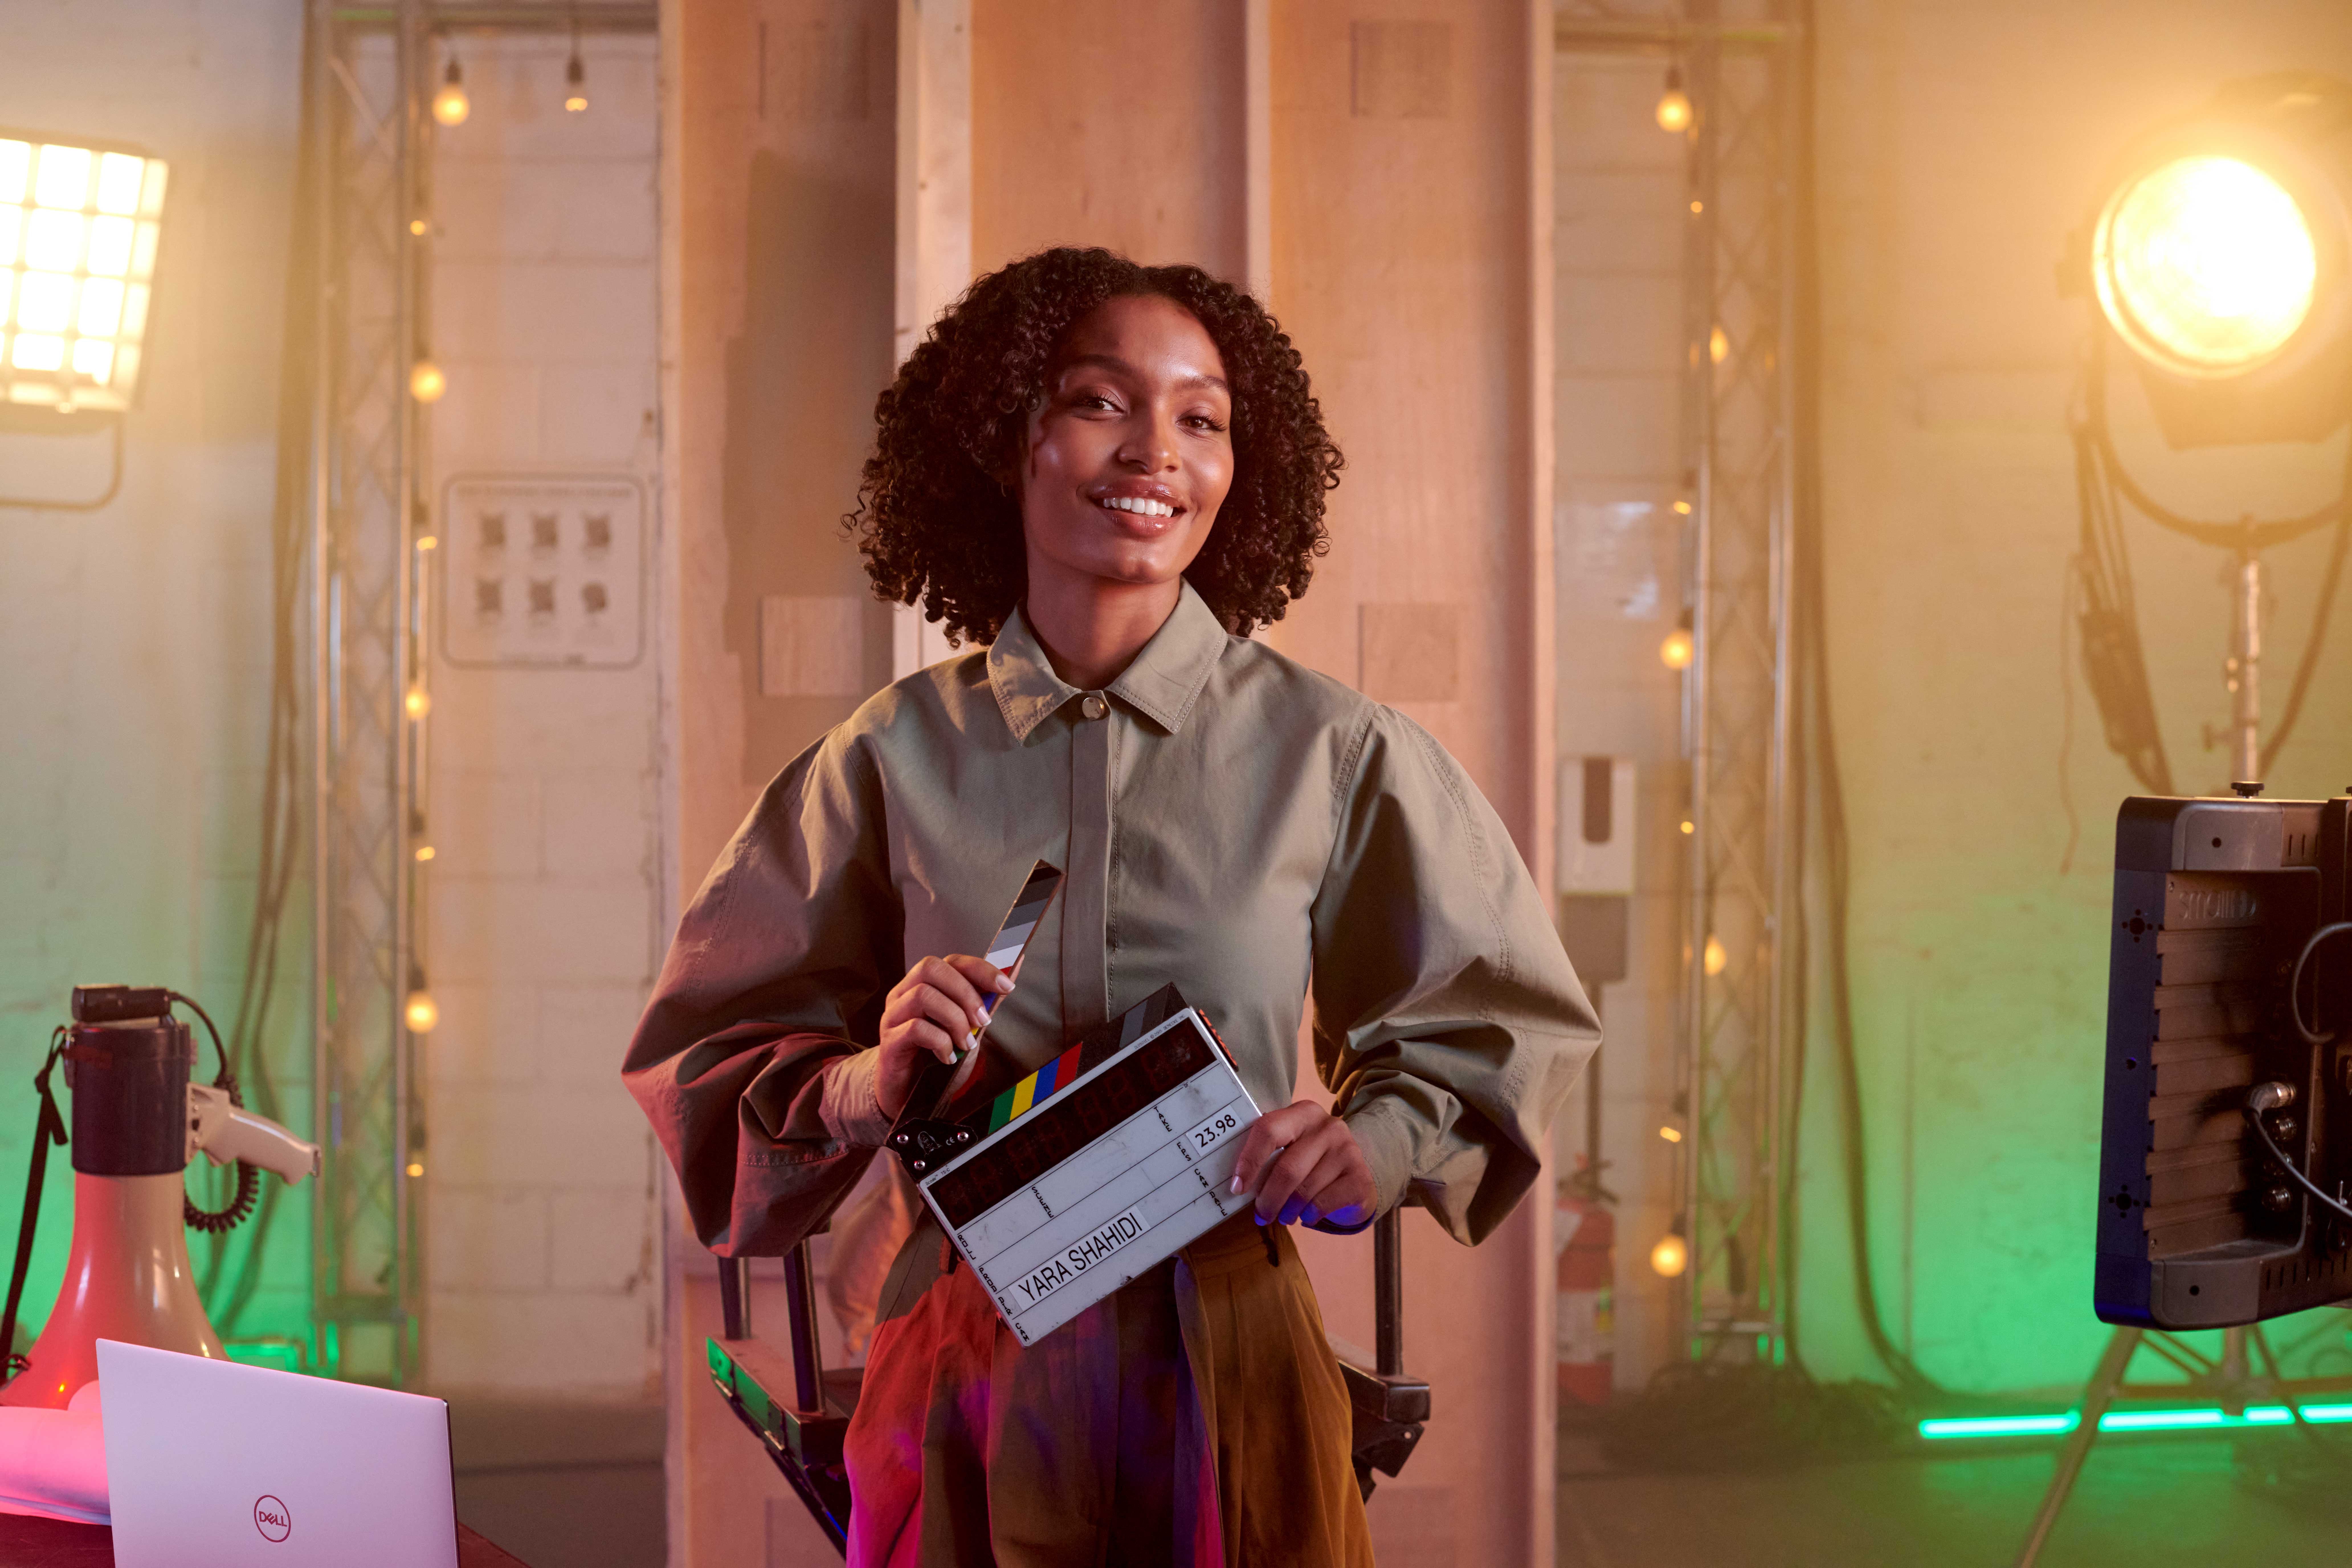 Yara Shahidi Partners With Dell To Inspire The Next Generation Of Changemakers Through Tech